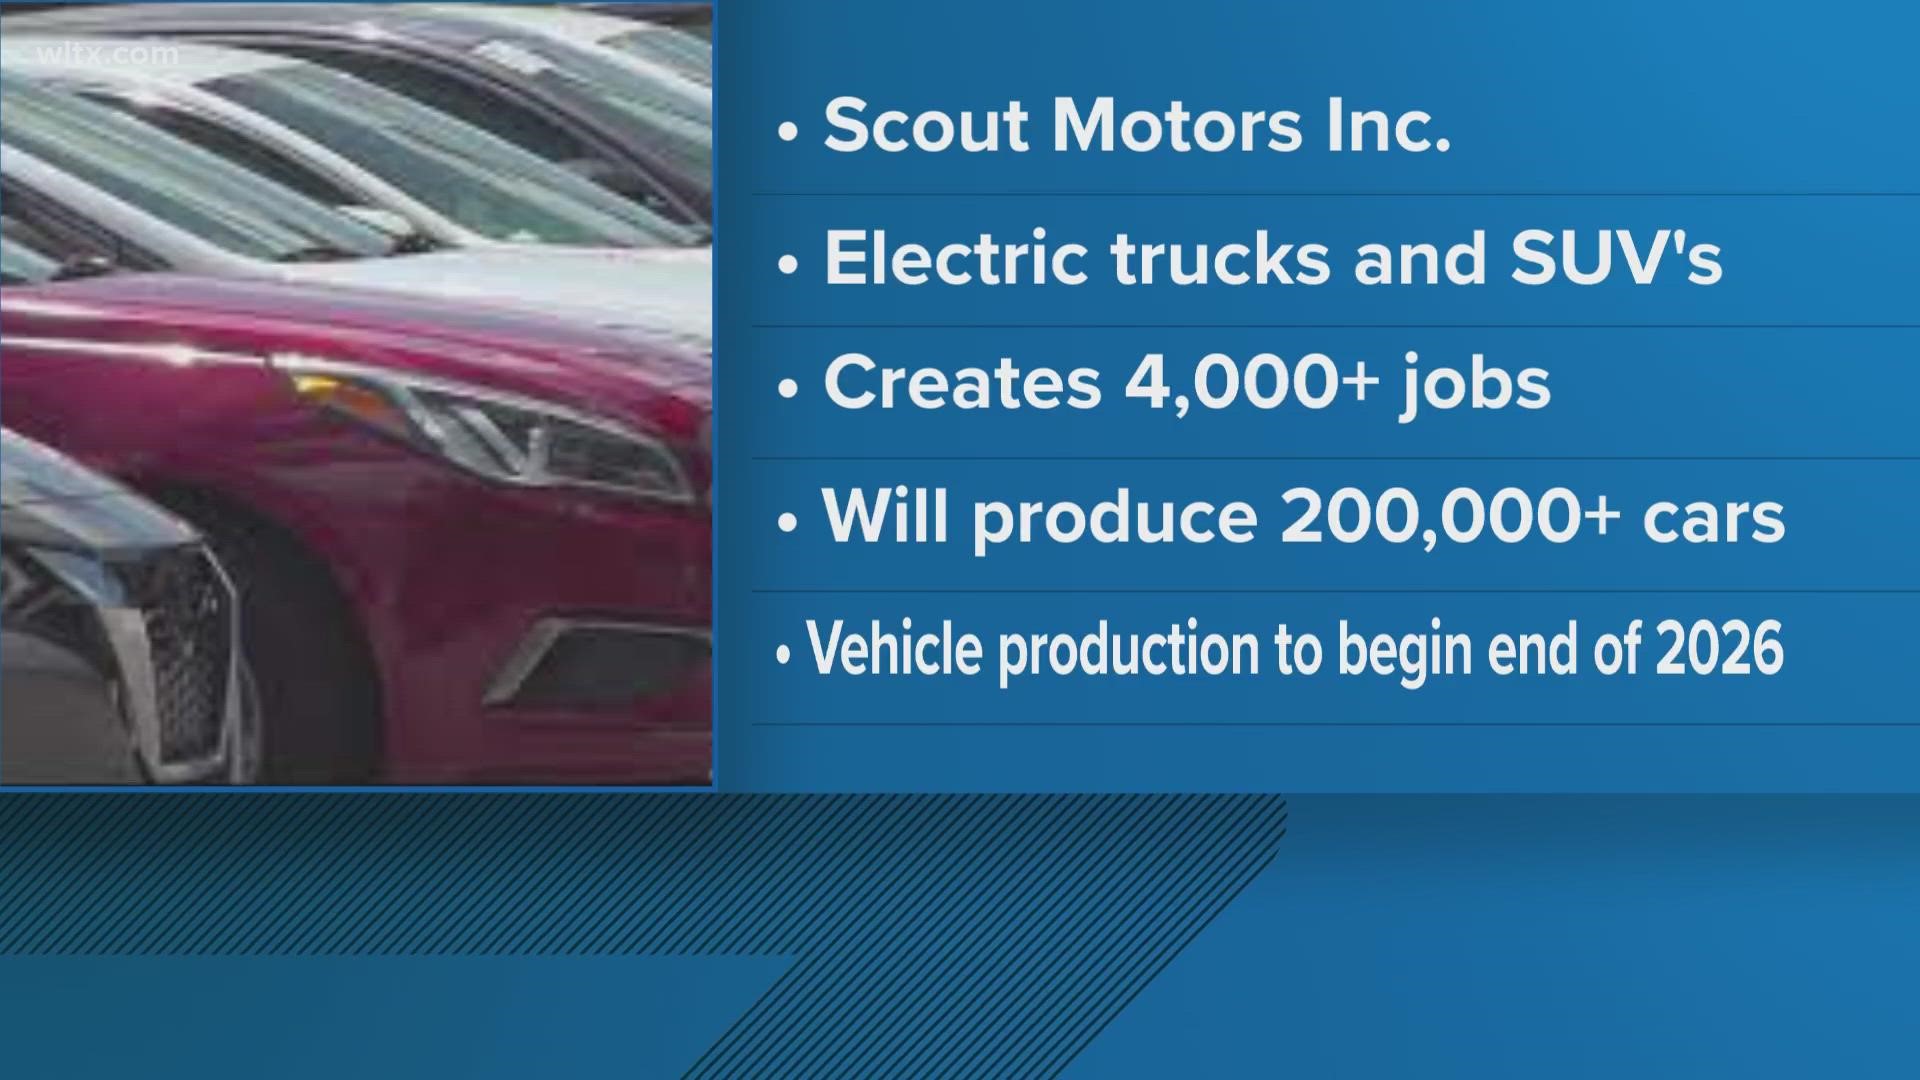 Electric vehicle manufacturing company Scout Motors has announced plans to locate in Richland County and bring thousands of jobs.